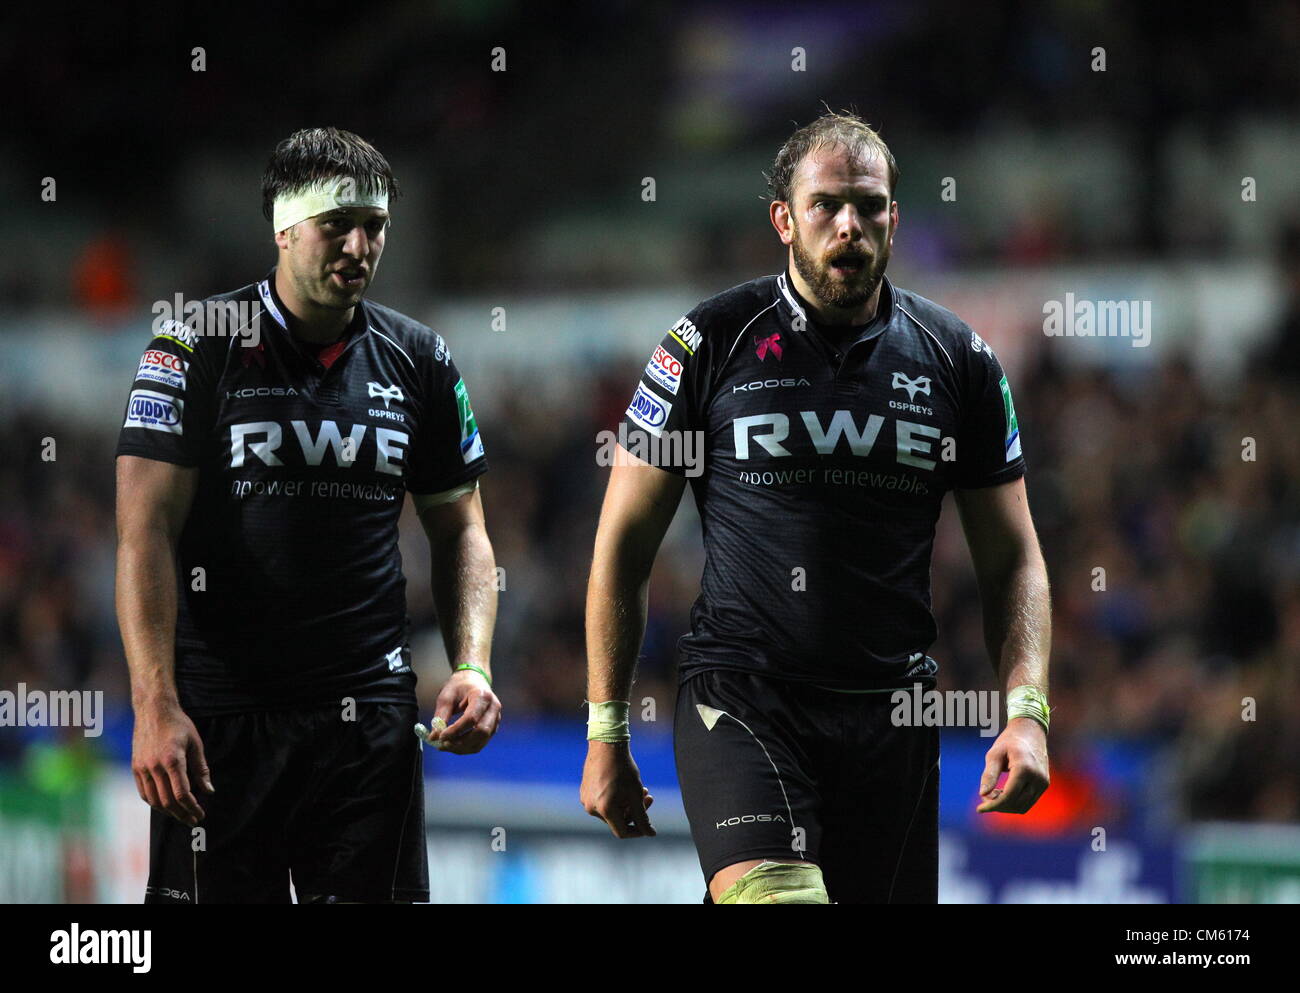 Friday 12 October 2012  Pictured L-R: Ryan Jones and Alun Wyn Jones of the Ospreys.   Re: Heineken Cup, Ospreys v Benetton Treviso at the Liberty Stadium, SWansea, south Wales. Stock Photo